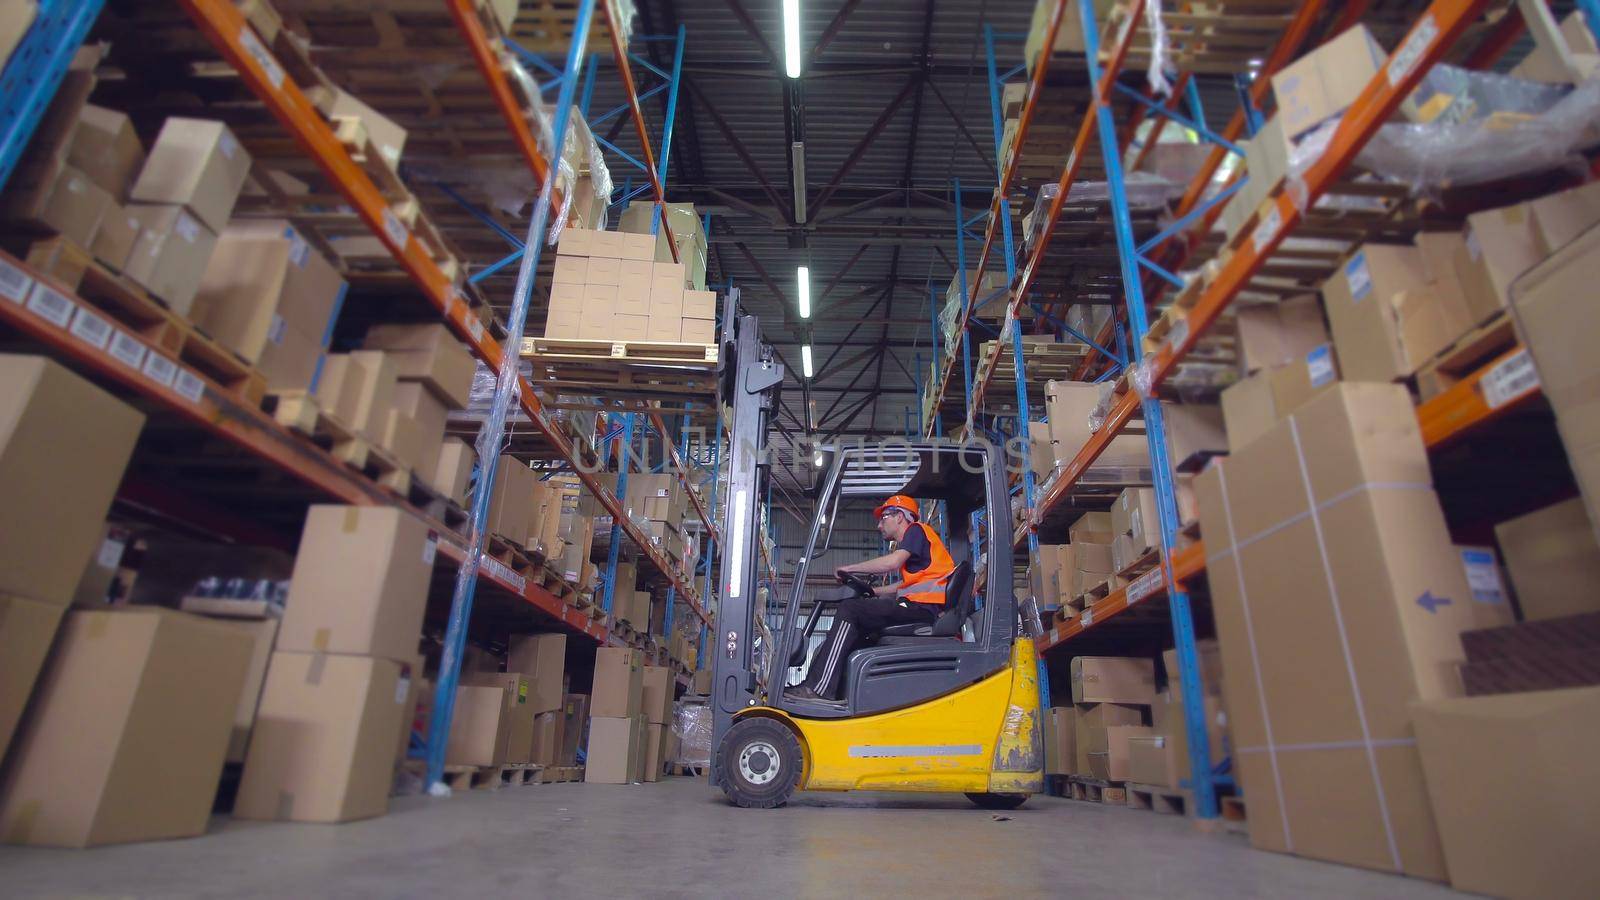 Worker in warehouse riding on forklift trucks with cardboard boxes. Man wearing in uniform hard hat and orange safety vest transporting goods on metal racks.